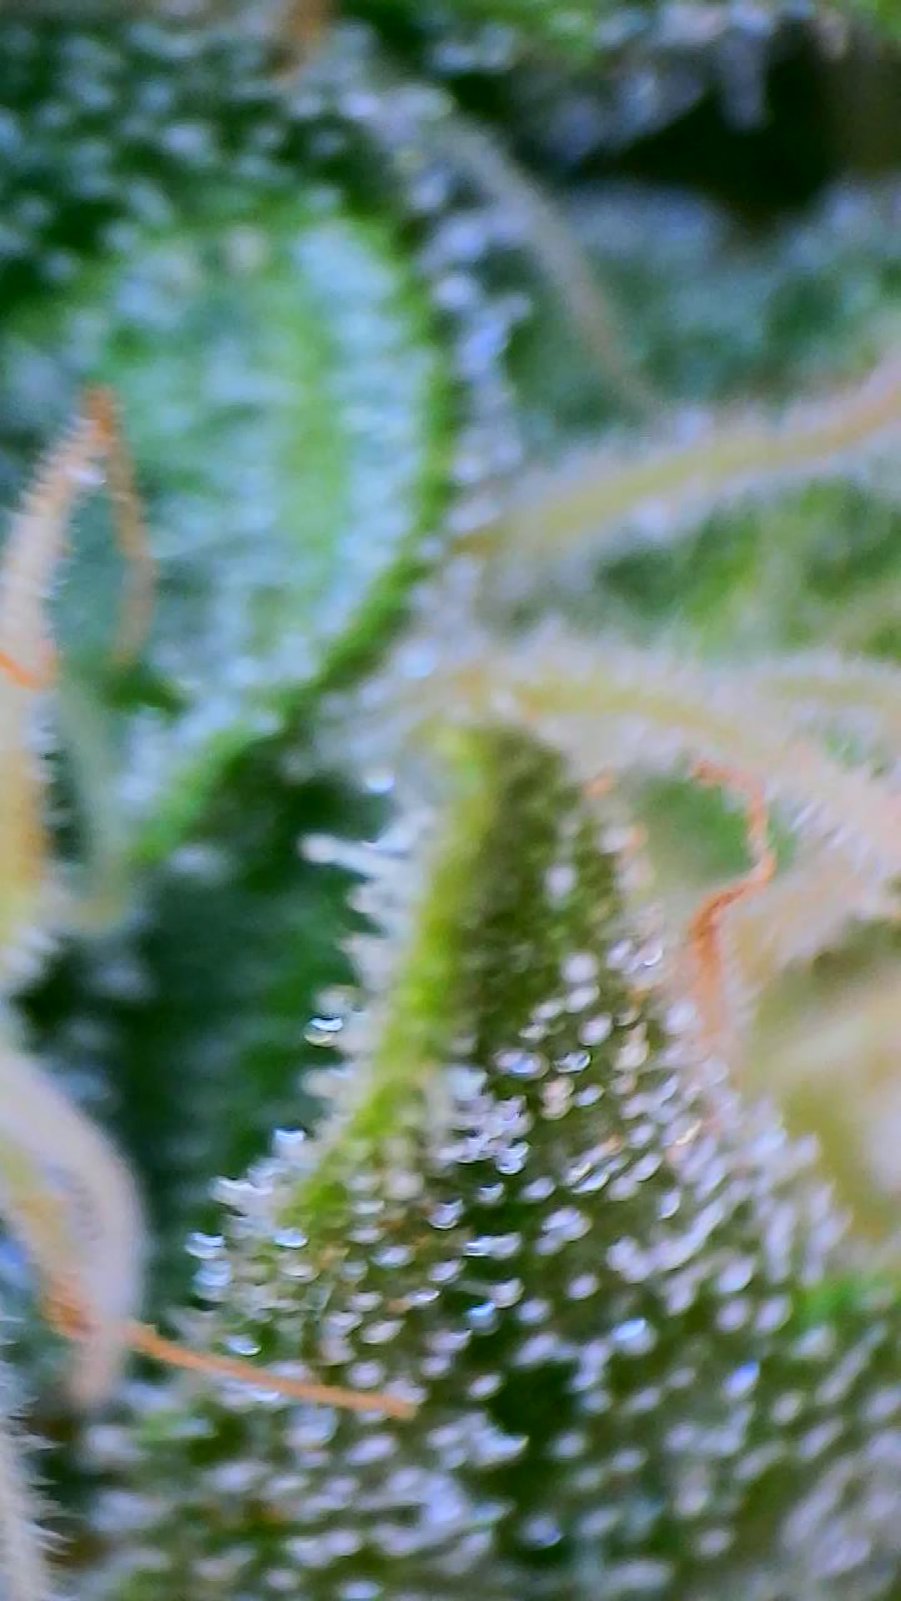 I just got my microscope to check trichomes and i think my plant is ready  to harvest and I wasn't expecting it so I haven't started flushing, what  would be my best